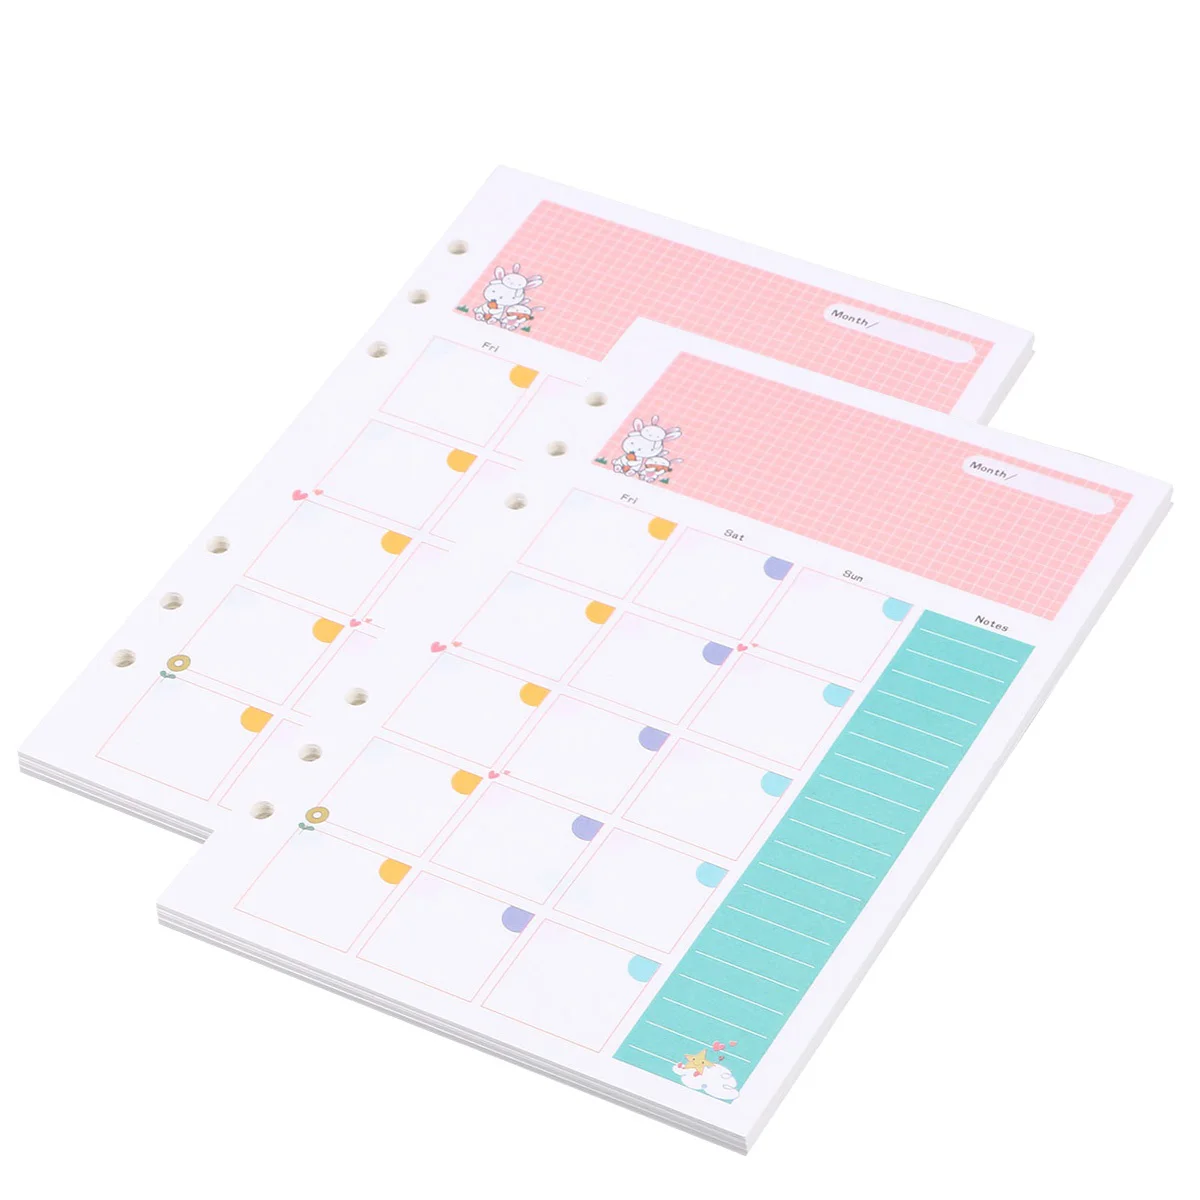 

A5 Refill Paper Colorful 6 Ring Monthly Paper Binder Refill Calendar Planner Inserts Personal Diary Filler Paper Page